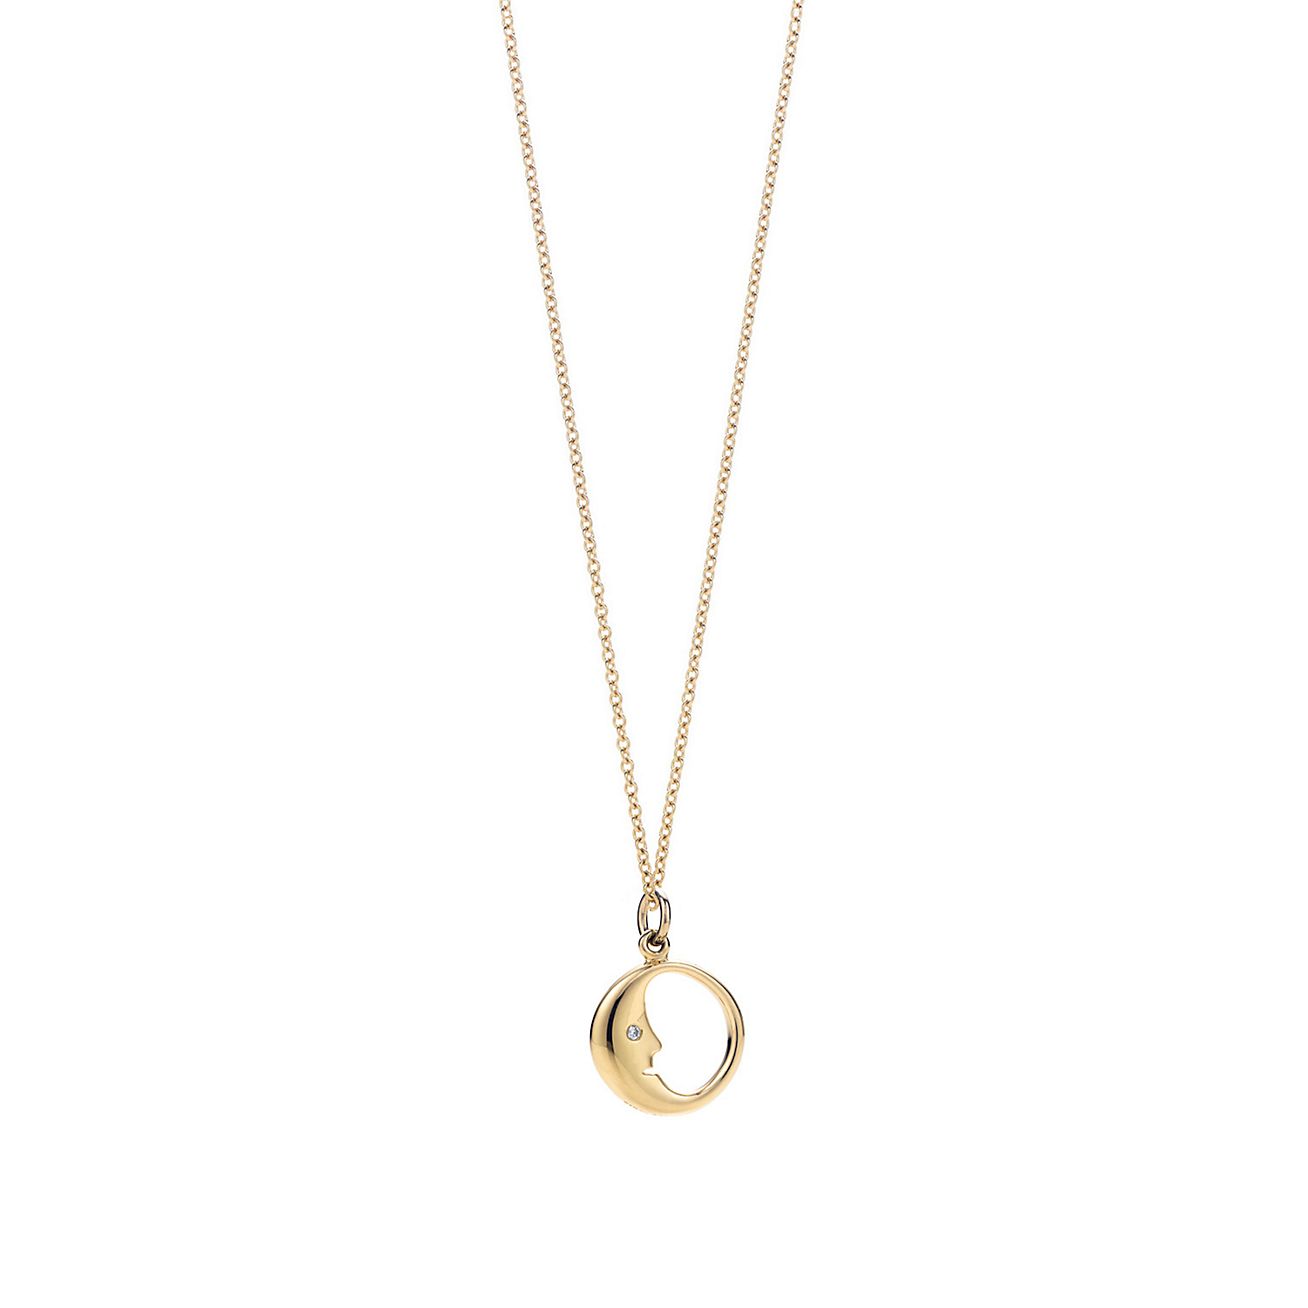 tiffany man in the moon necklace